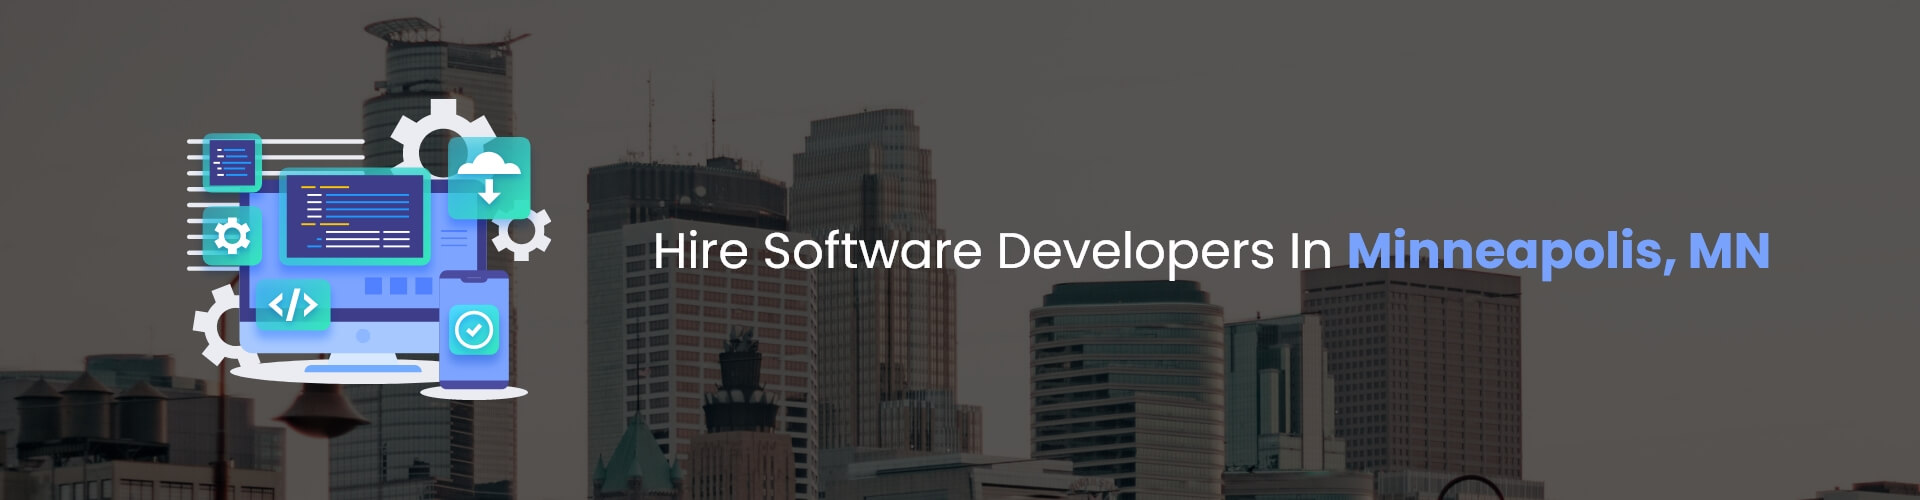 hire software developers in minneapolis